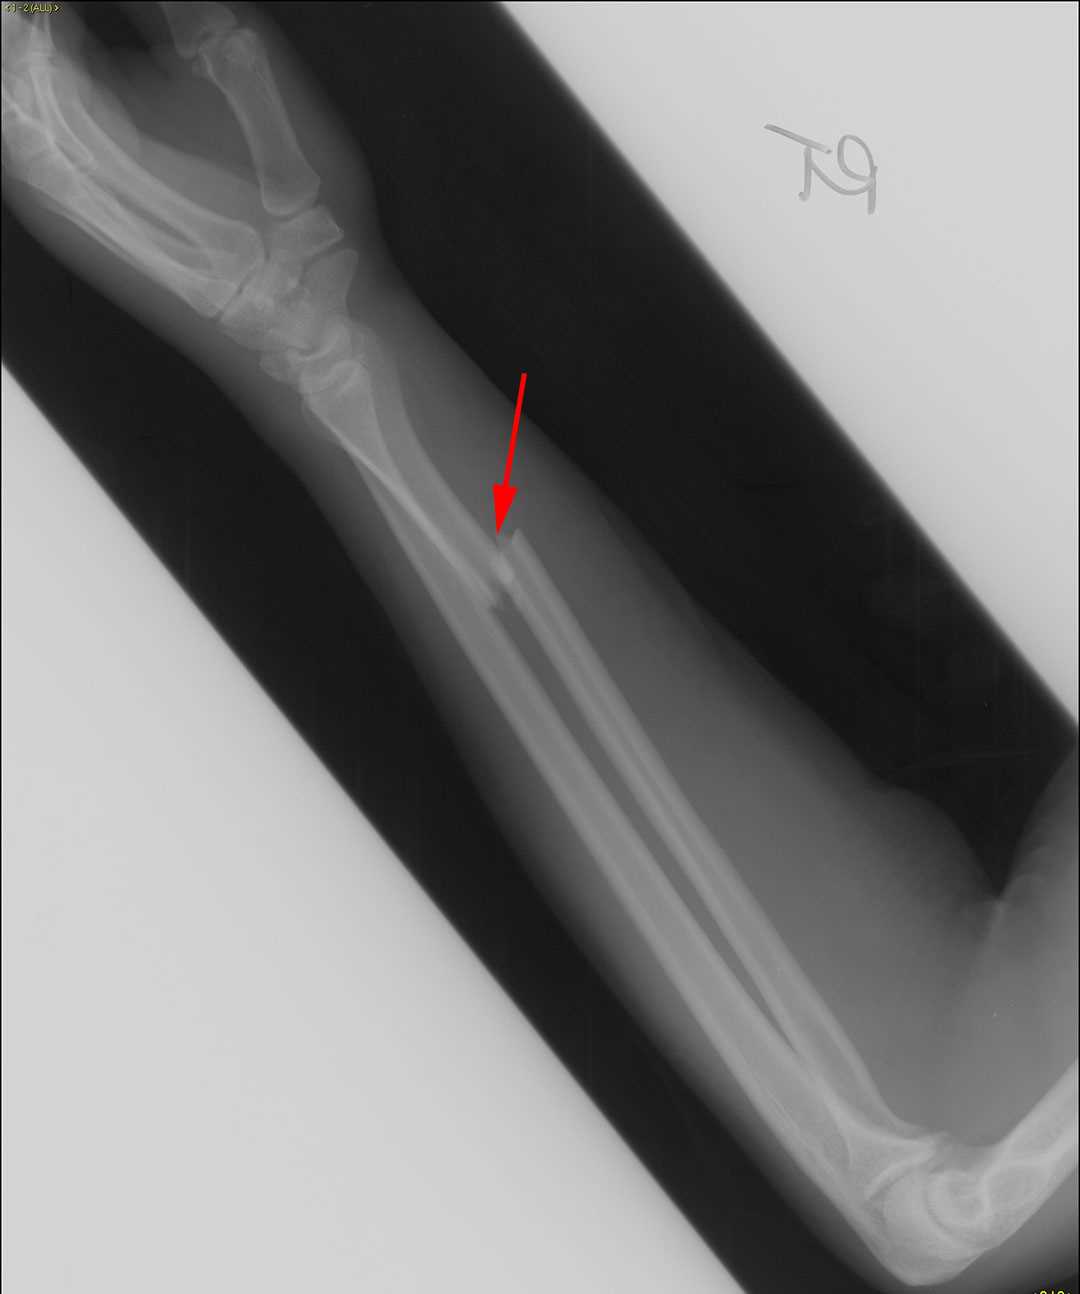 galeazzi fracture healing time